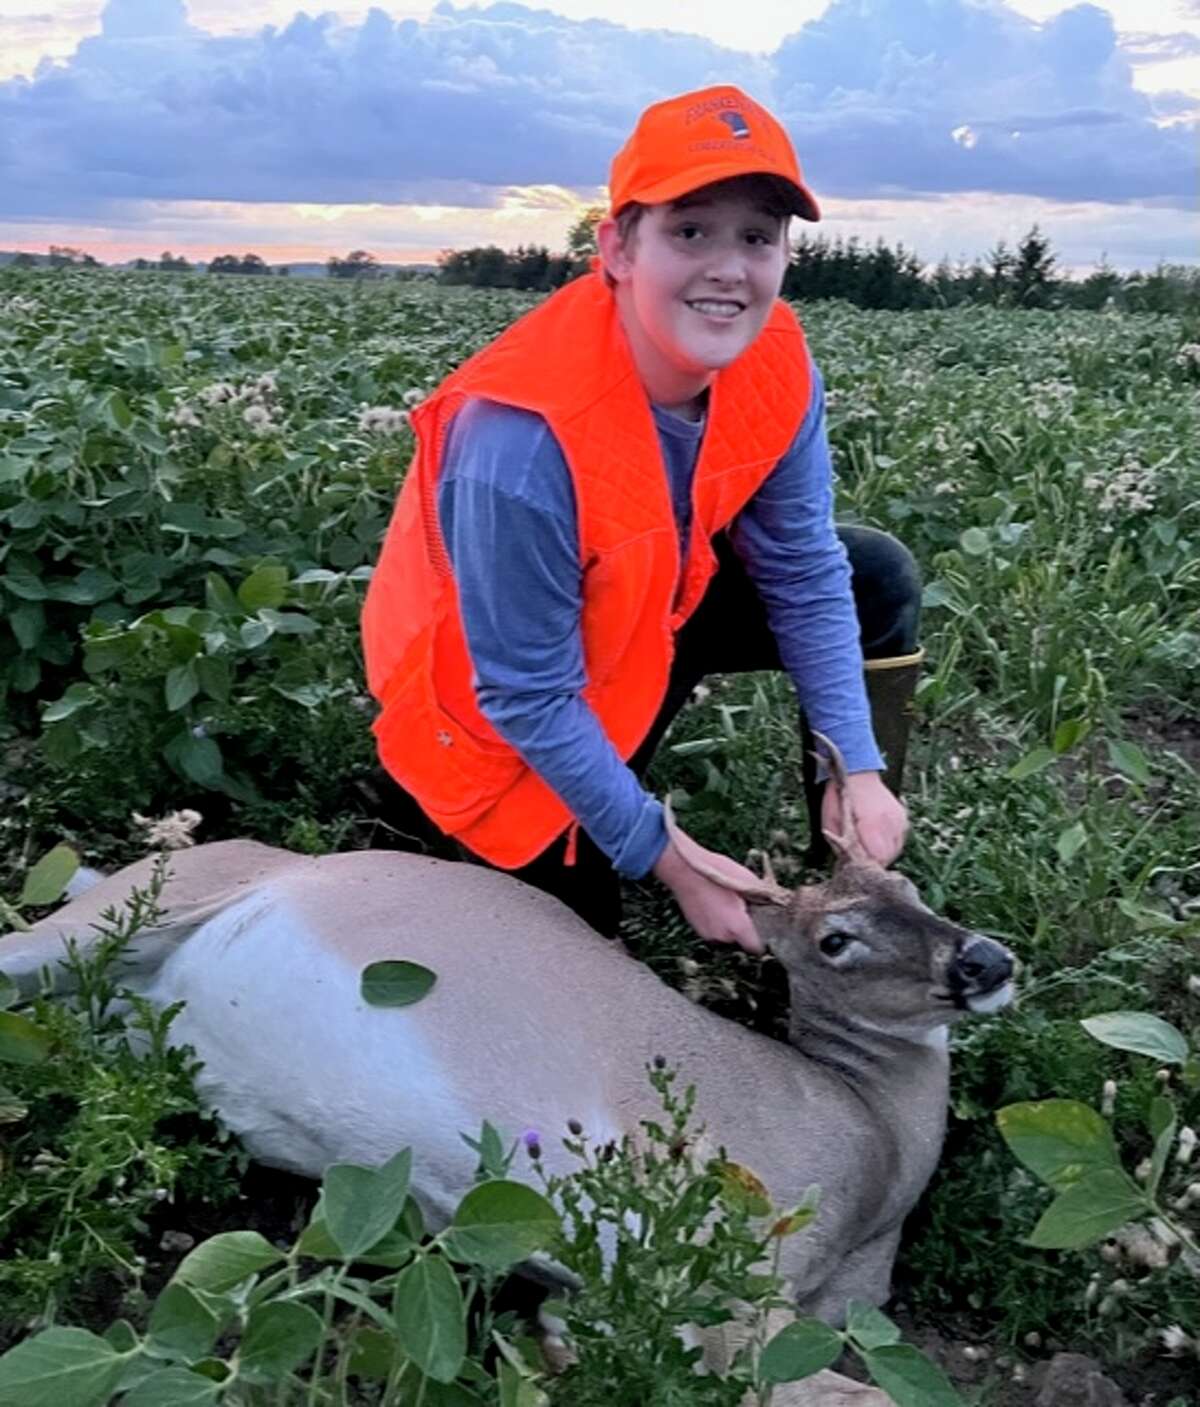 Orlando Lounsbury, 13, of Dayton, Ohio, was proud of the five-point buck that he dropped on the spot with one shot at 100 yards during the recent Liberty Hunt in Michigan.